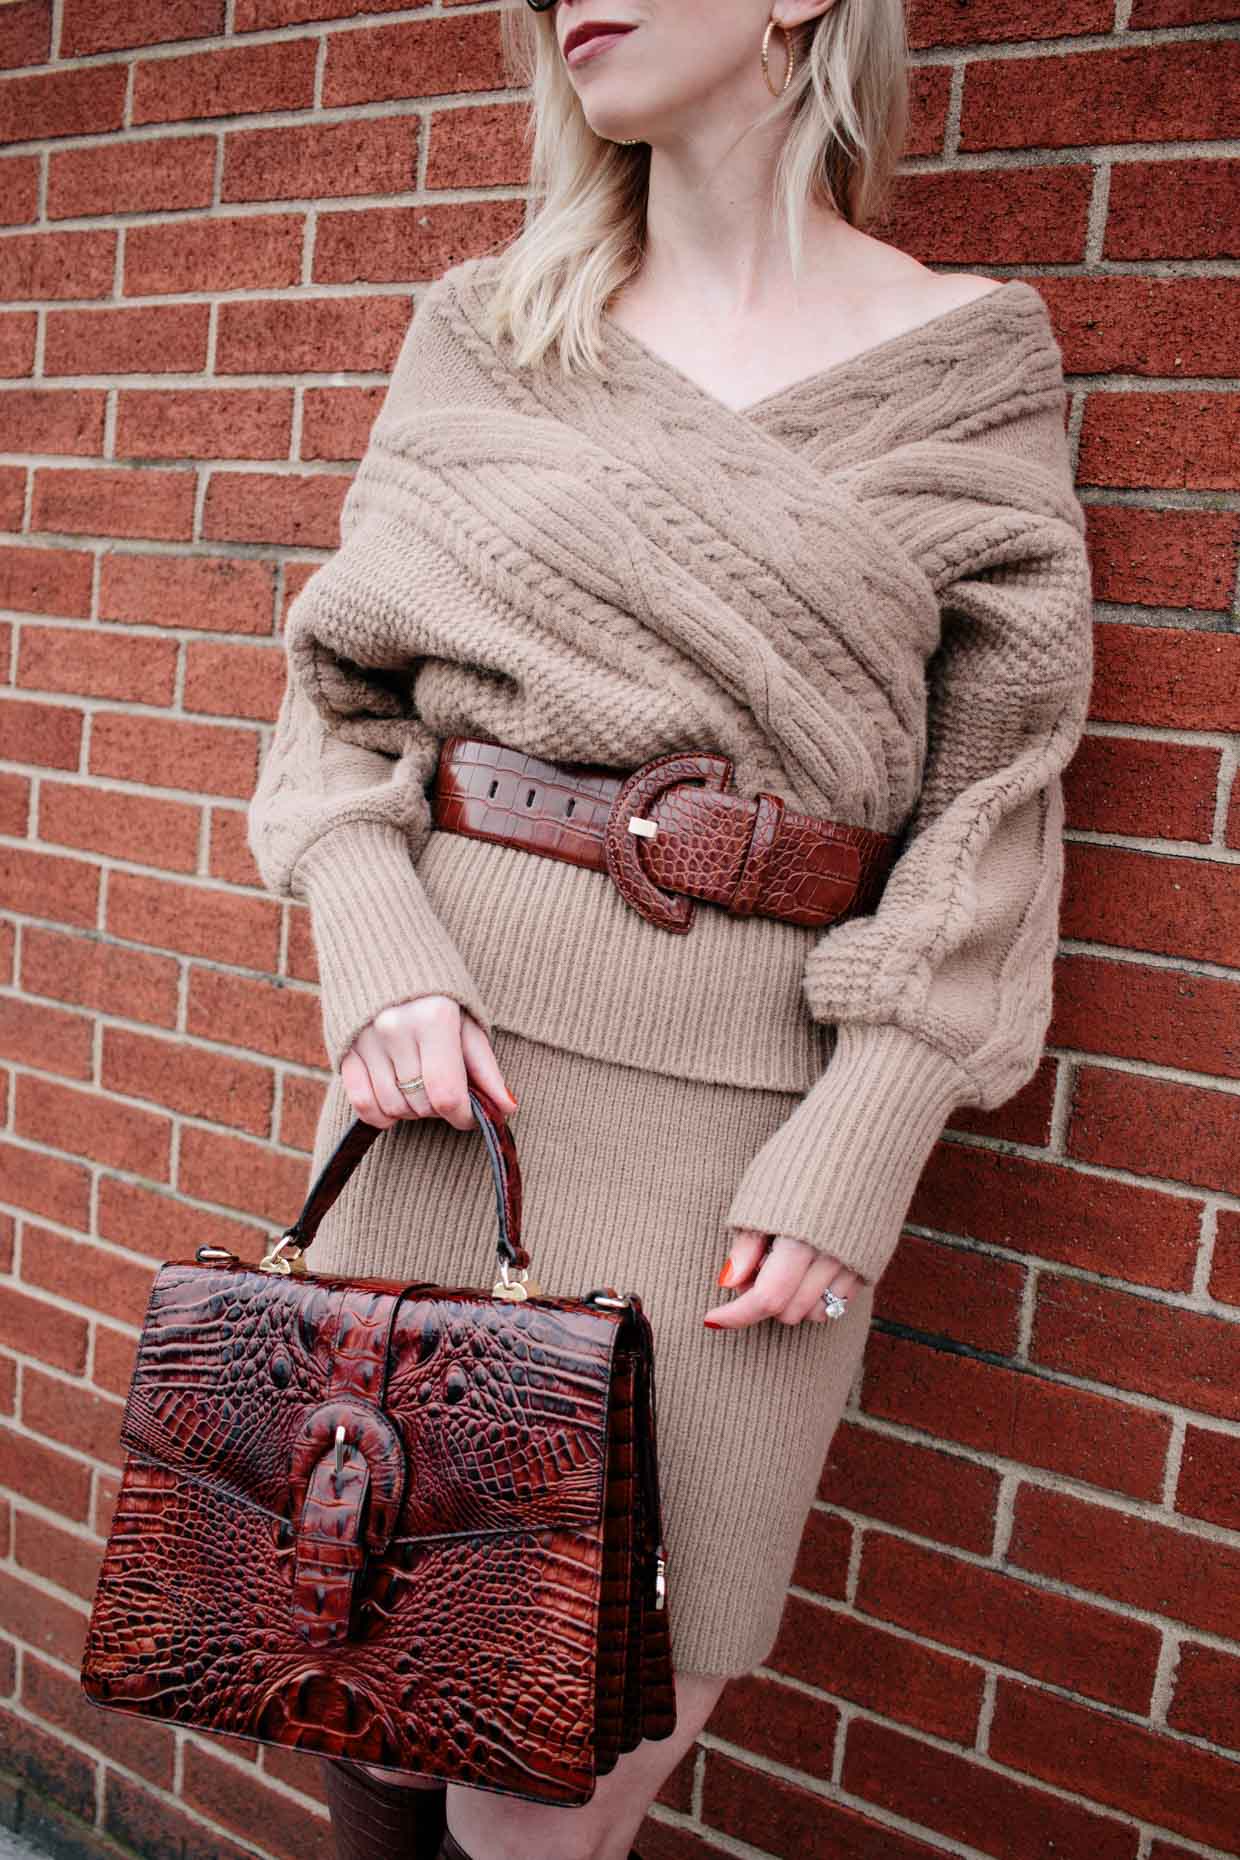 Meagan Brandon fashion blogger of Meagan's Moda wears monochromatic camel  outfit with knit dress, croc leather boots and Louis Vuitton Dauphine MM  bag - Meagan's Moda